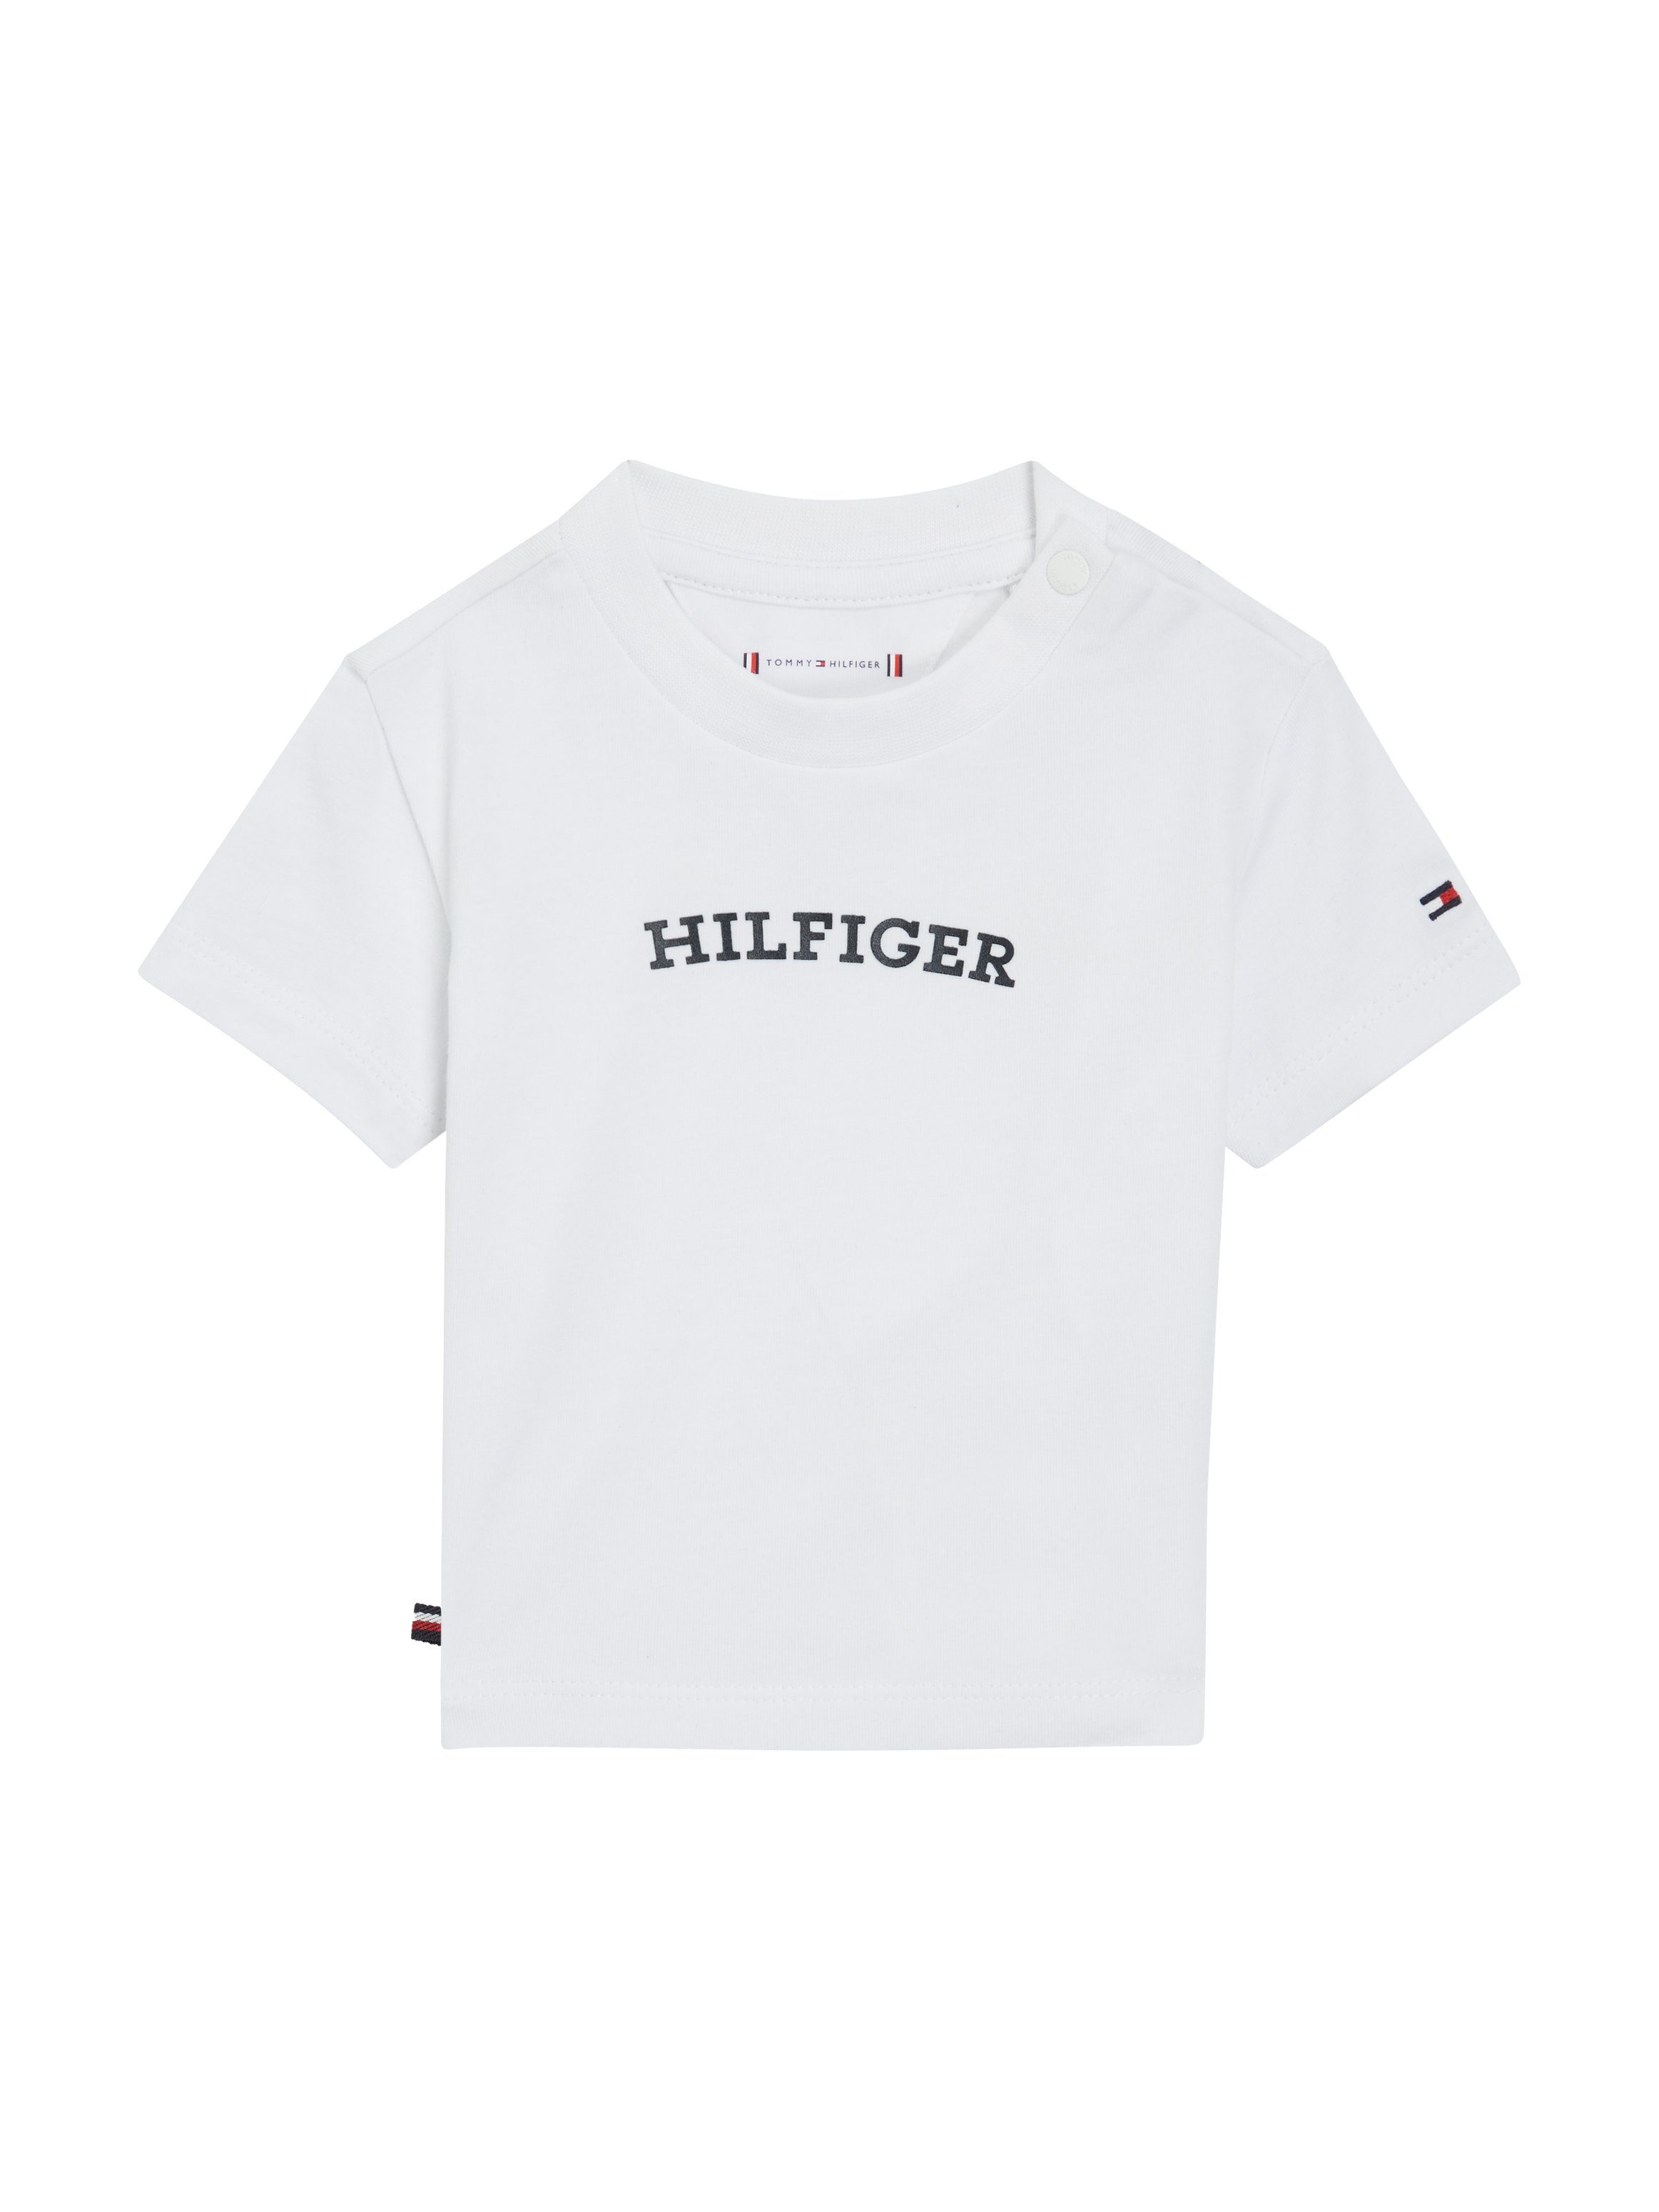 Print TEE Hilfiger Front T-Shirt S/S MONOTYPE CURVED Logo-Flag White Tommy Hilfiger BABY großem mit &